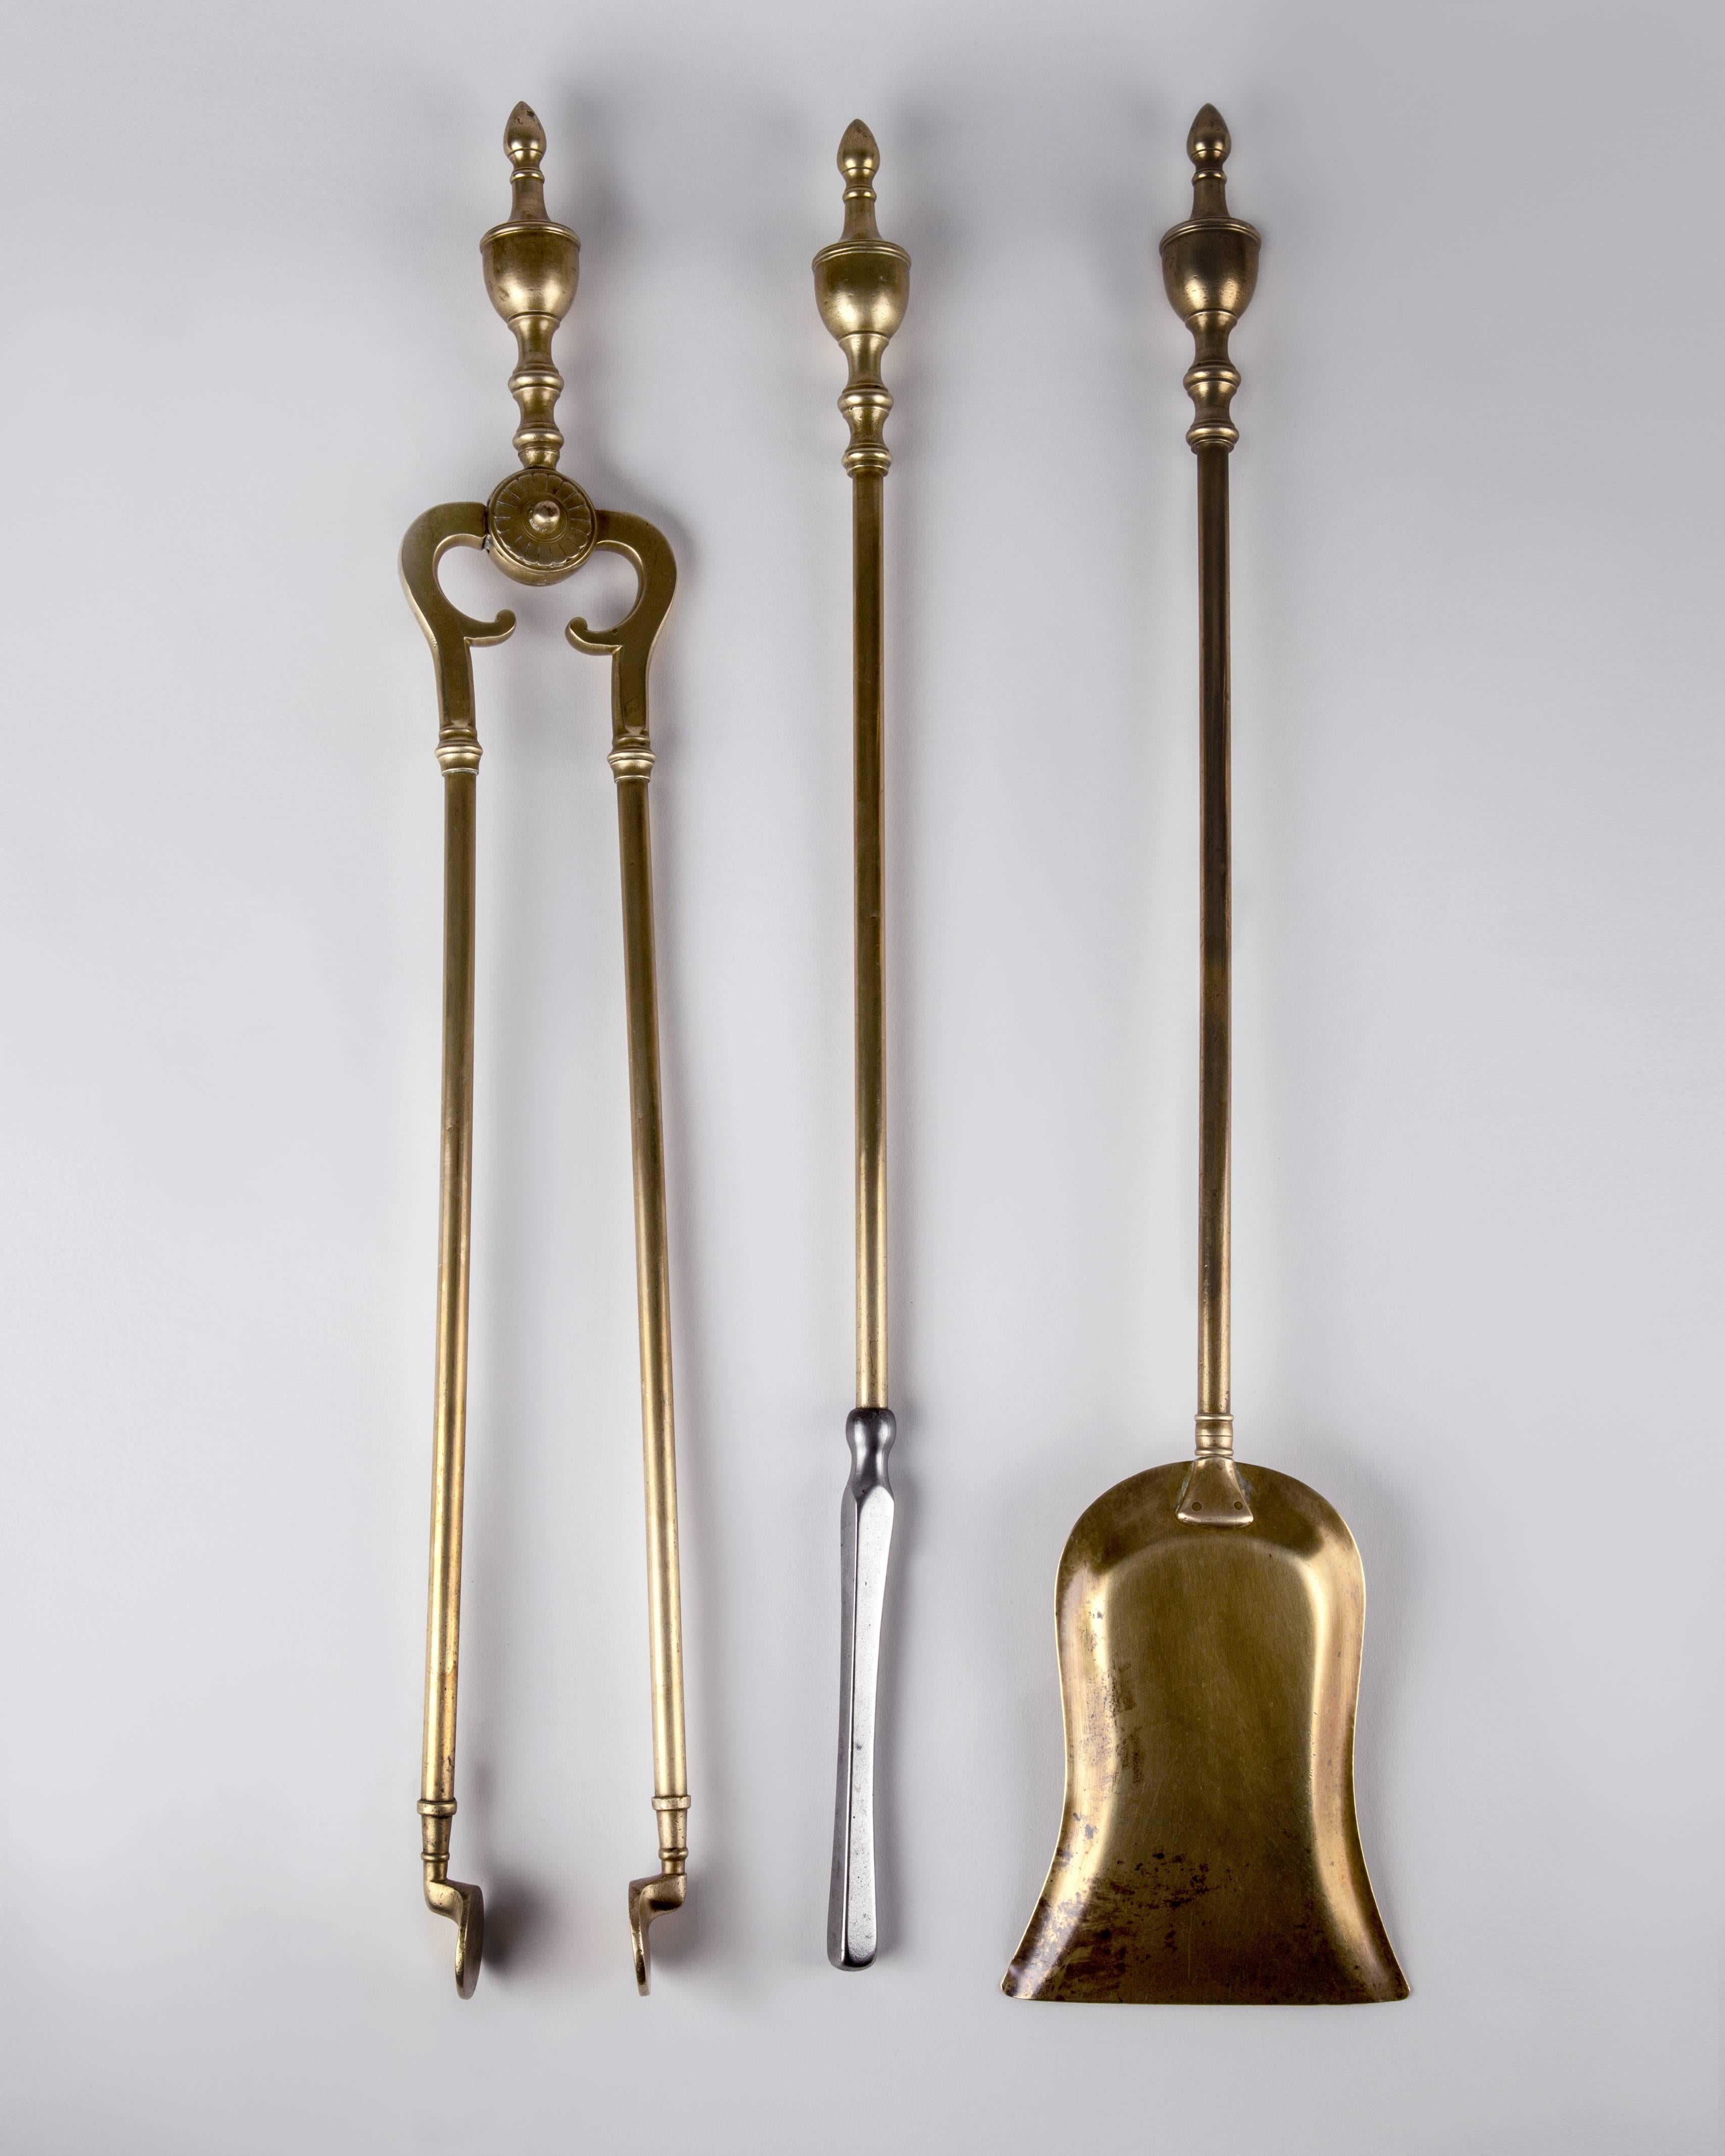 An antique fireplace tool set with a poker, a shovel, tongs and a caddy in its original aged brass finish, circa 1930.

Dimensions:
Overall: 27-1/4